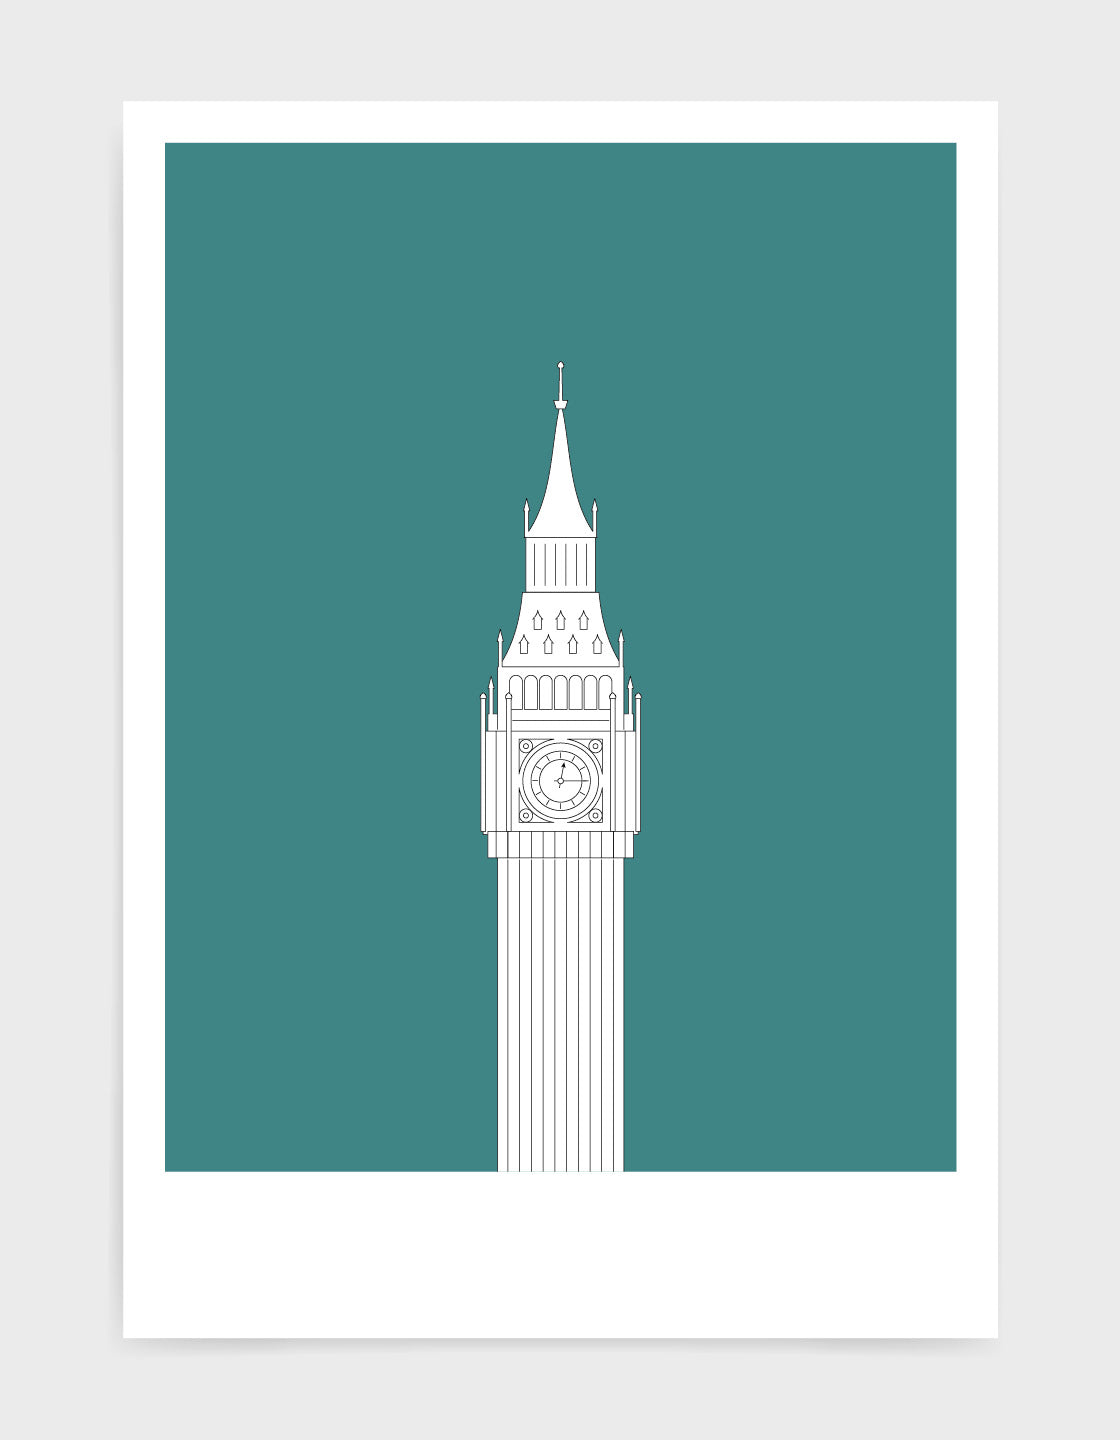 illustration of big ben in white against an aqua green background